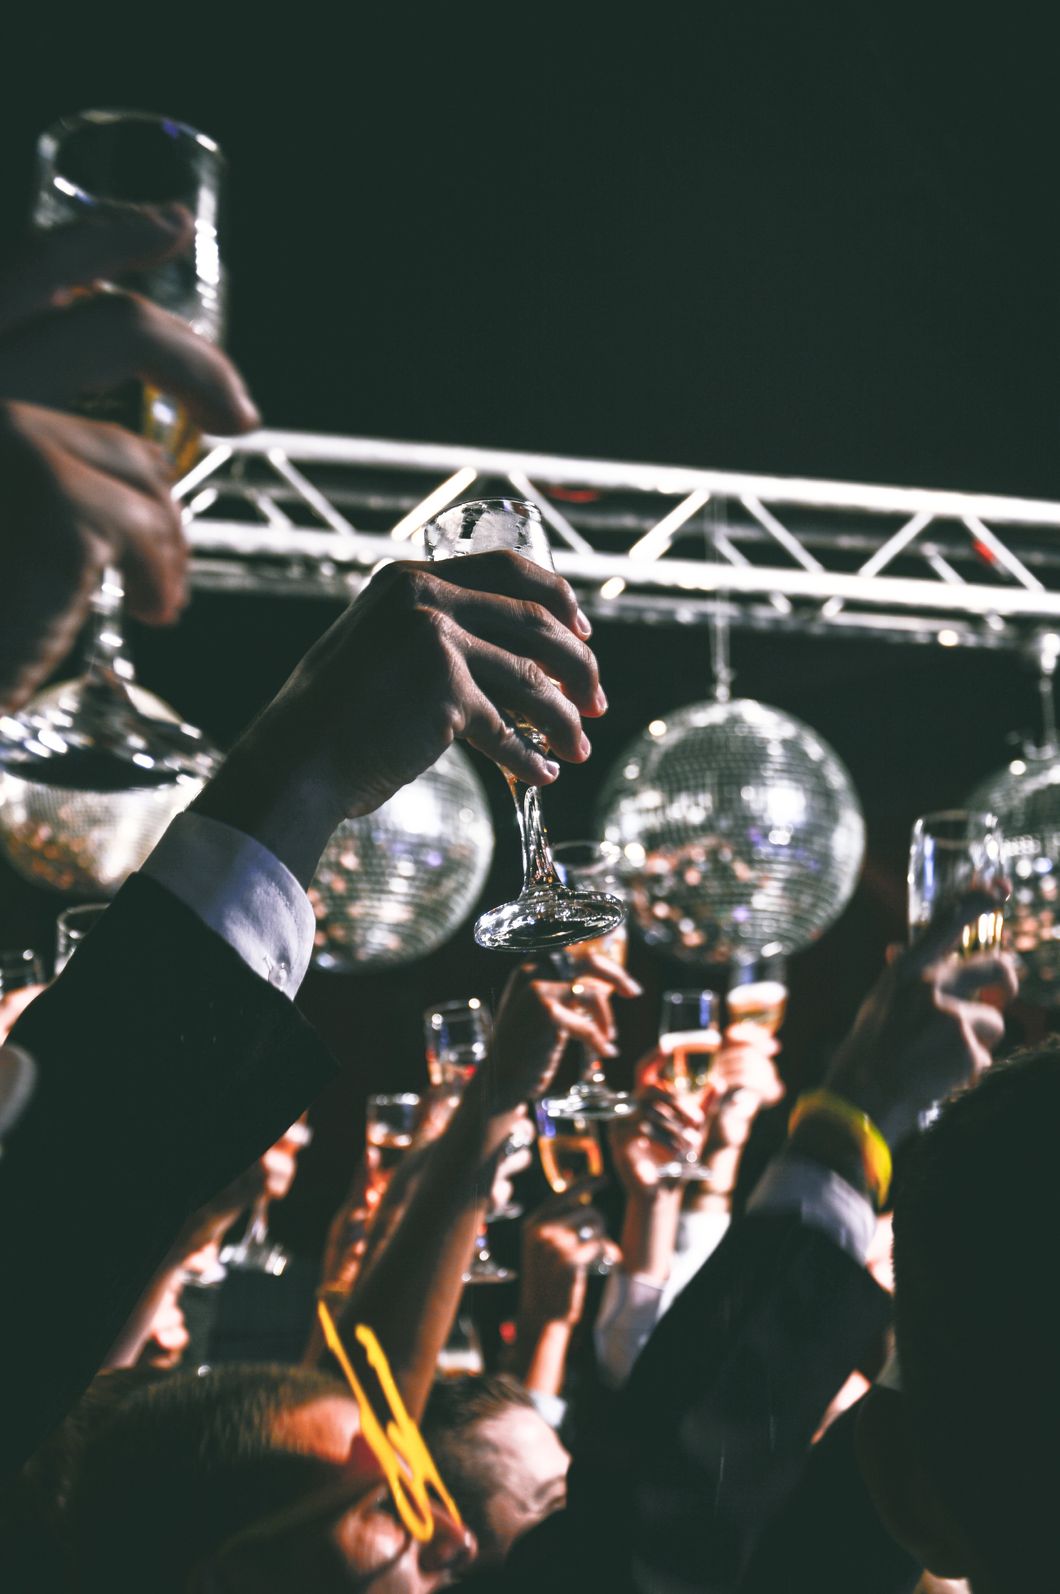 https://www.pexels.com/photo/toast-party-ball-cheers-59884/